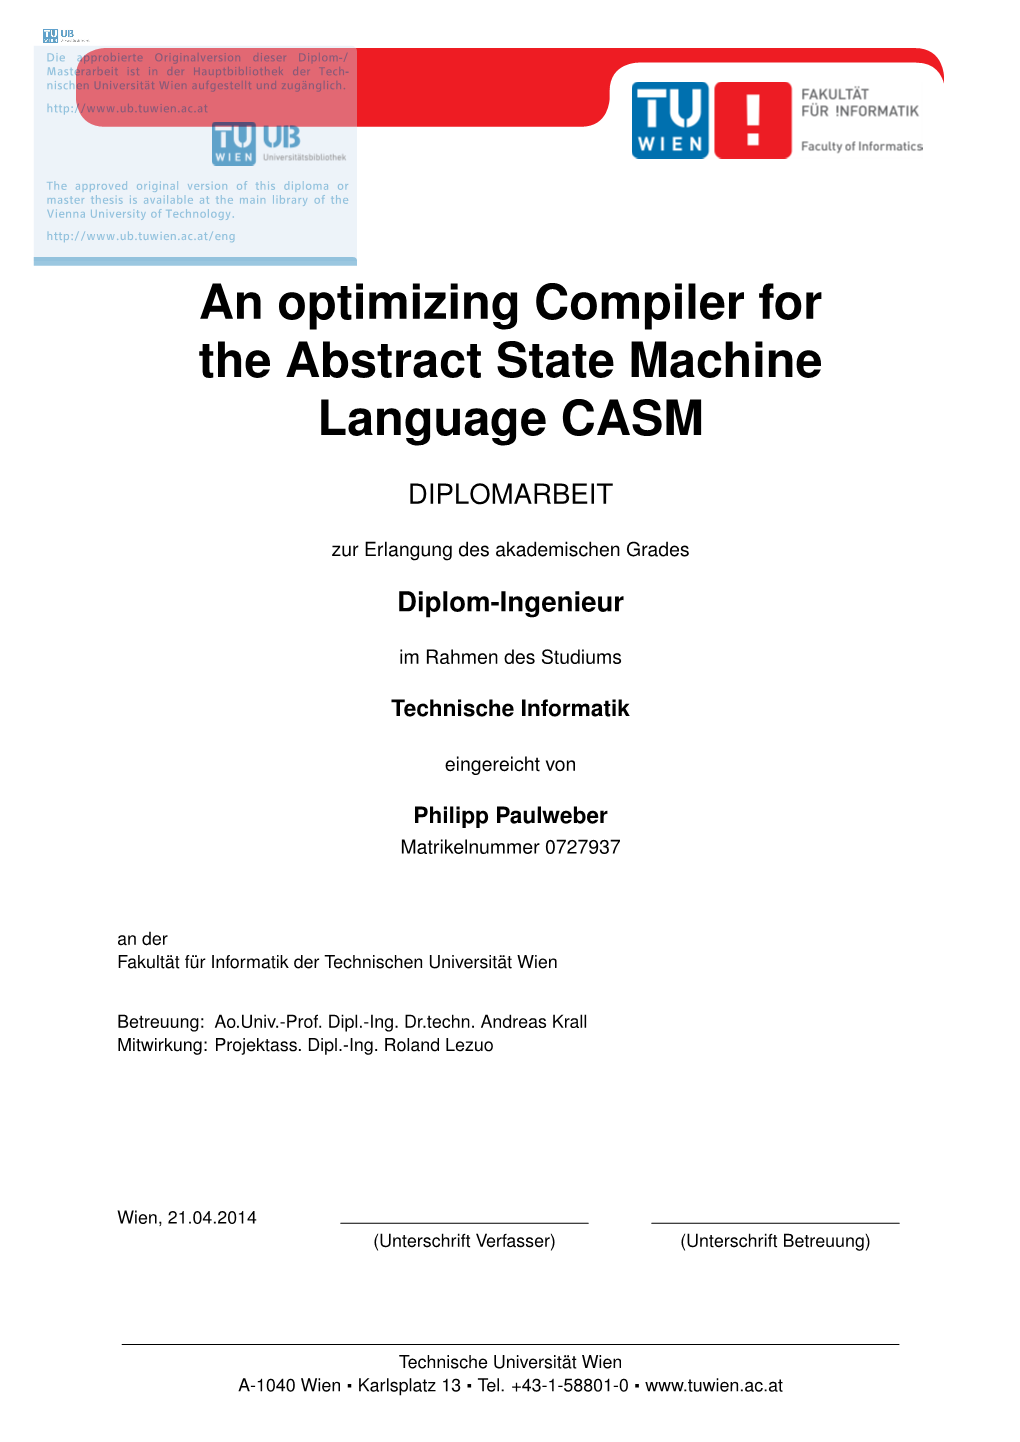 An Optimizing Compiler for the Abstract State Machine Language CASM